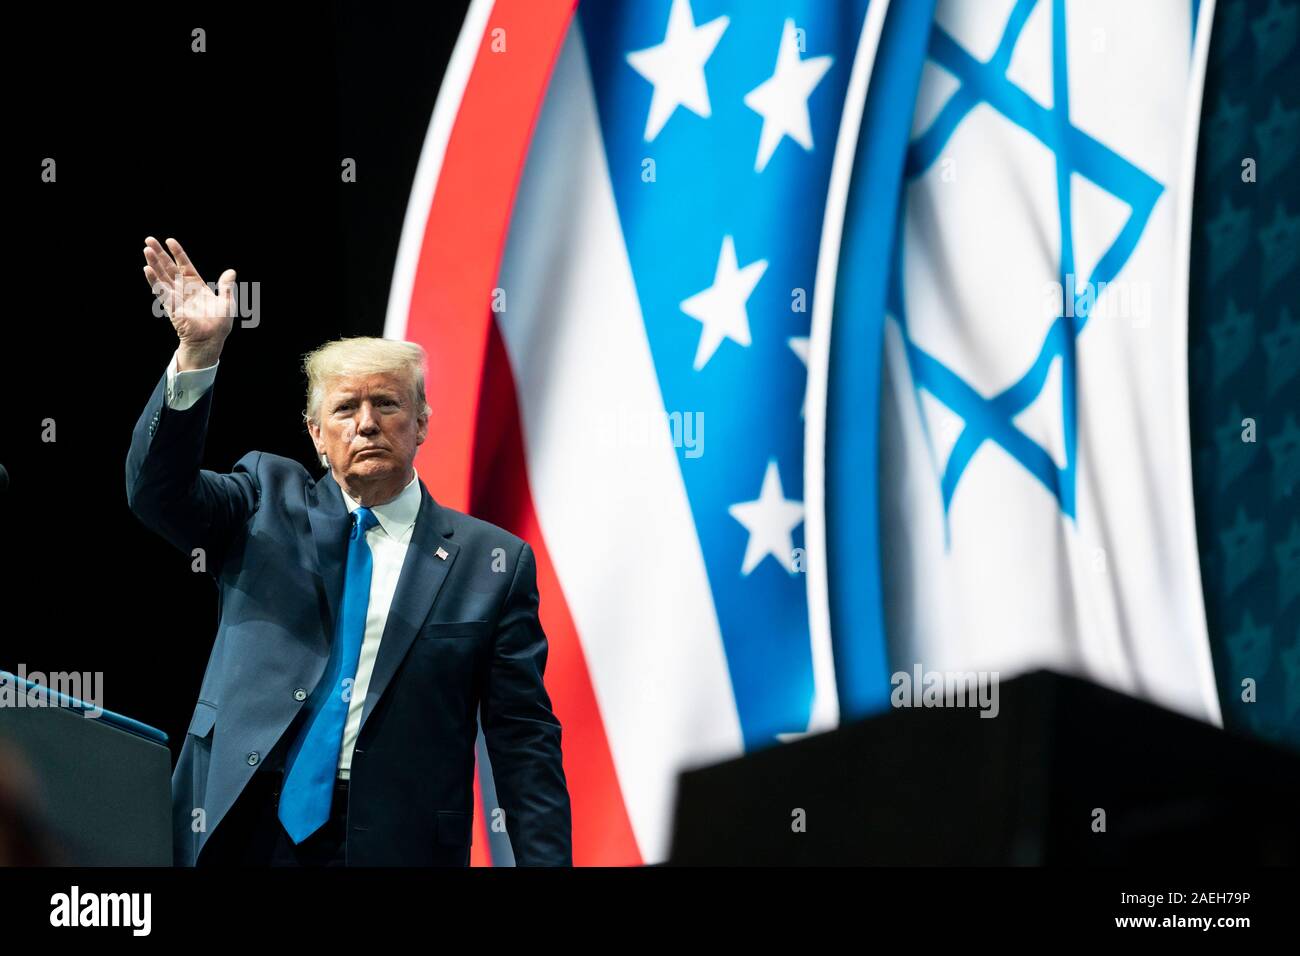 U.S President Donald Trump waves as he takes the stage to address the Israeli American Council National Summit at the Diplomat Beach Resort December 7, 2019 in Hollywood, Florida. Stock Photo